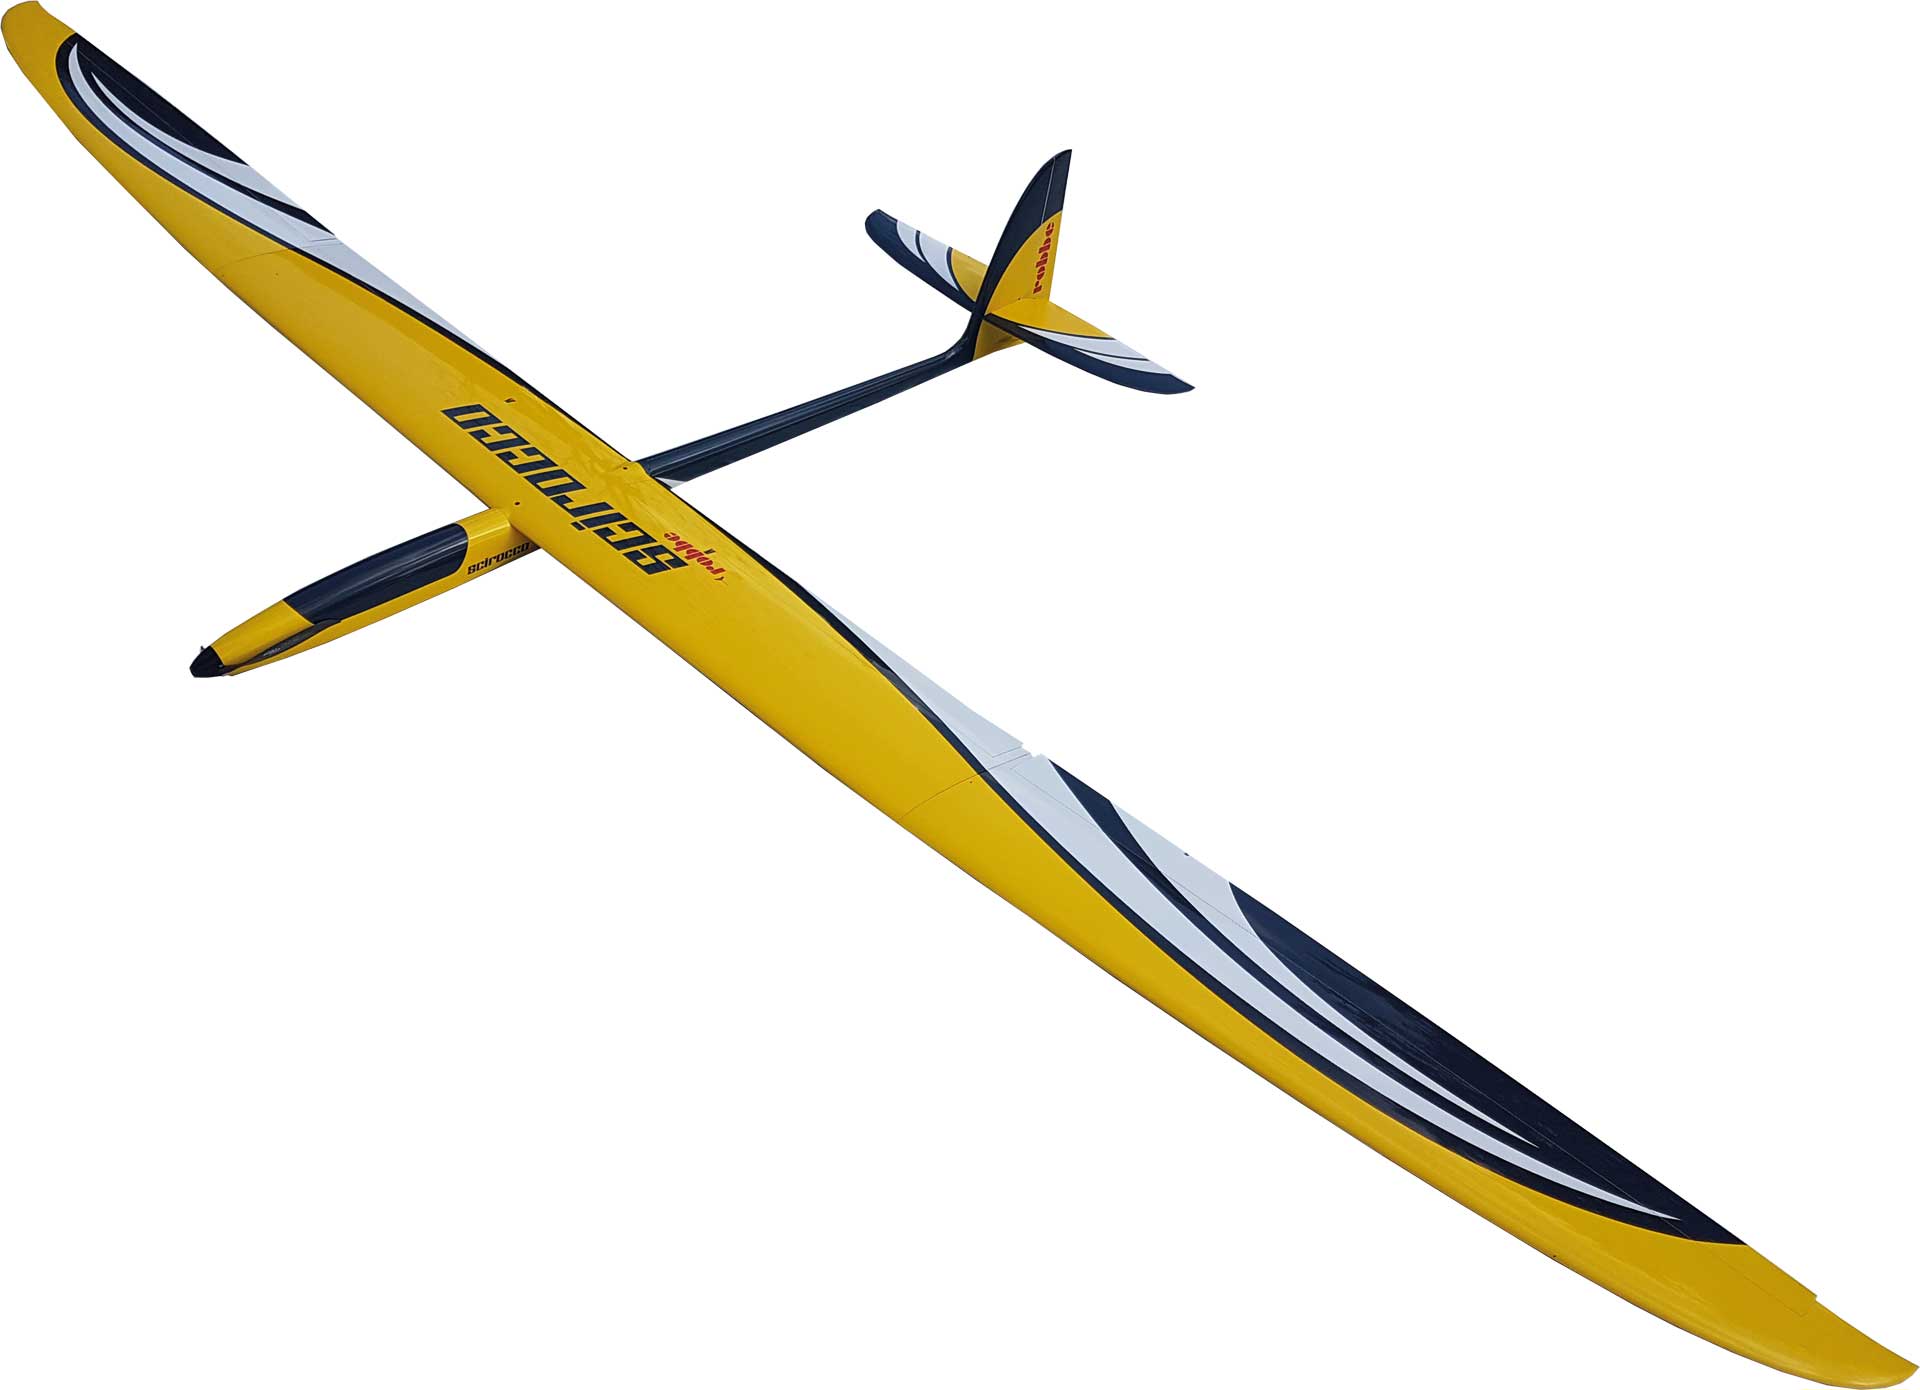 Robbe Modellsport SCIROCCO L 4,0M PNP (YELLOW) FULL-GRP HIGH PERFORMANCE GLIDER W. 4-FLAP WING